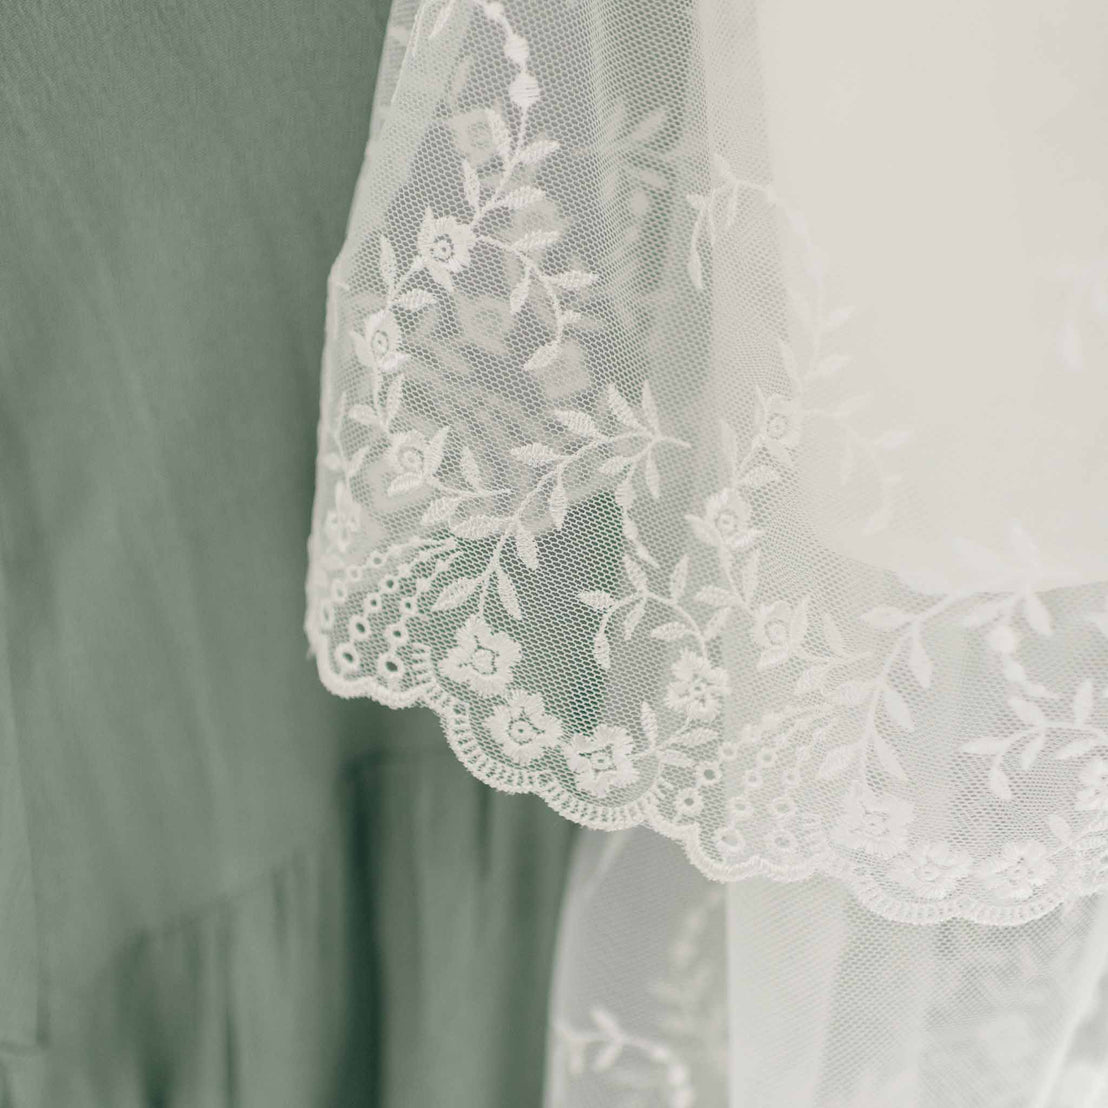 Close-up of a delicate white lace fabric with floral embroidery draped over a greenish-gray textured fabric. The vintage heirloom style lace, resembling the intricate details of an Ella Christening Gown, has a scalloped edge that creates a beautiful contrast with the smooth underlying material.